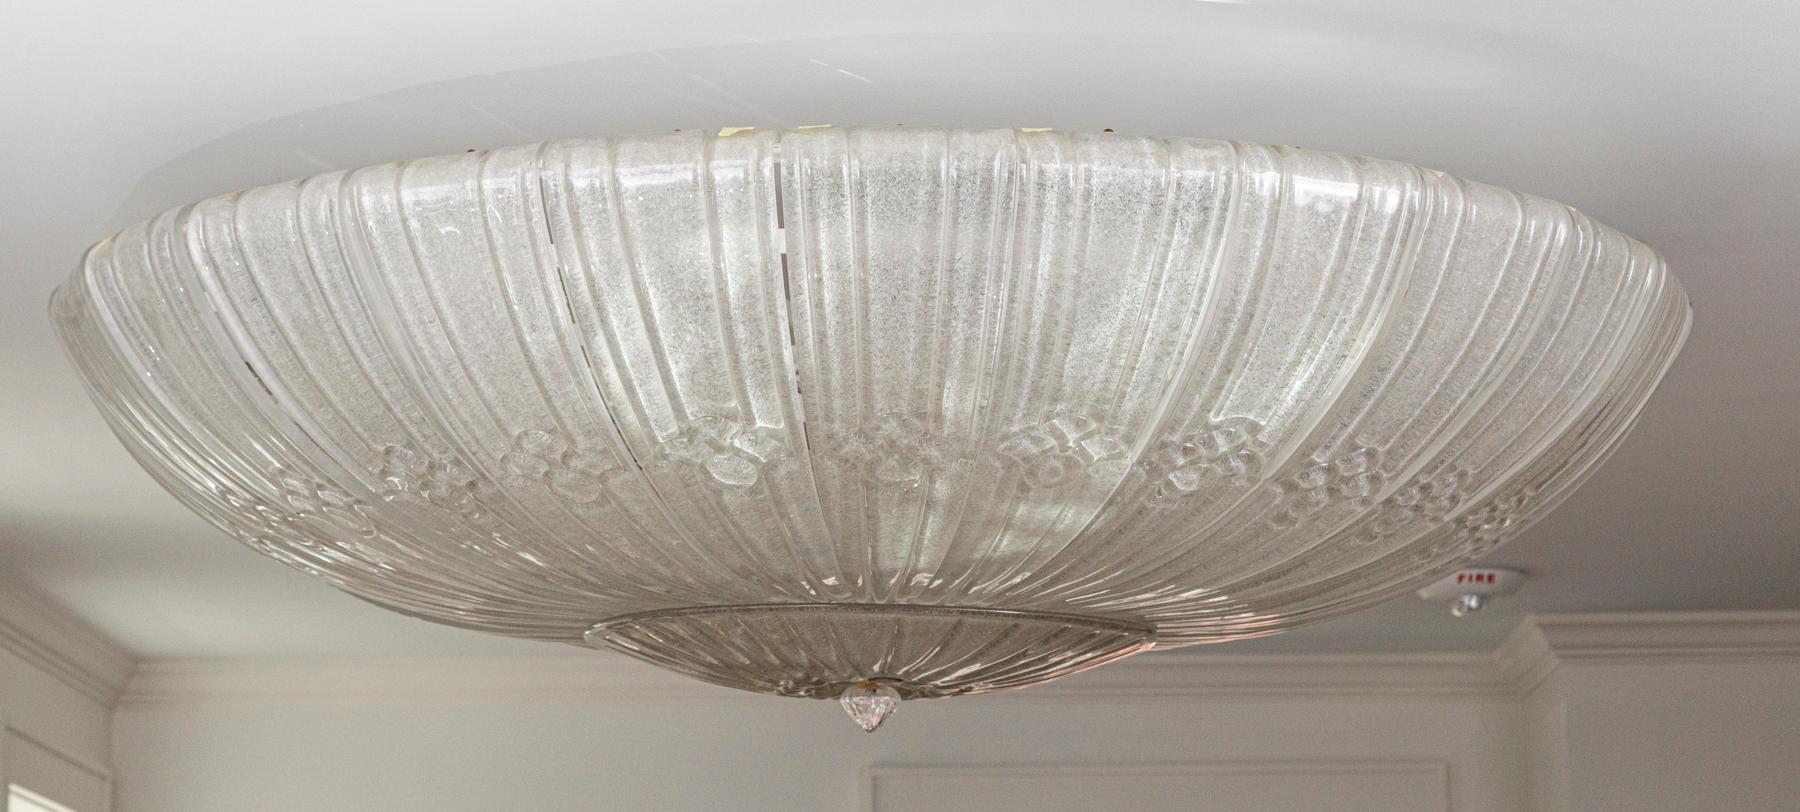 Monumental Art Deco Style Dome-Shaped Ceiling Fixture by Barovier, UL Certified In Good Condition For Sale In Westport, CT